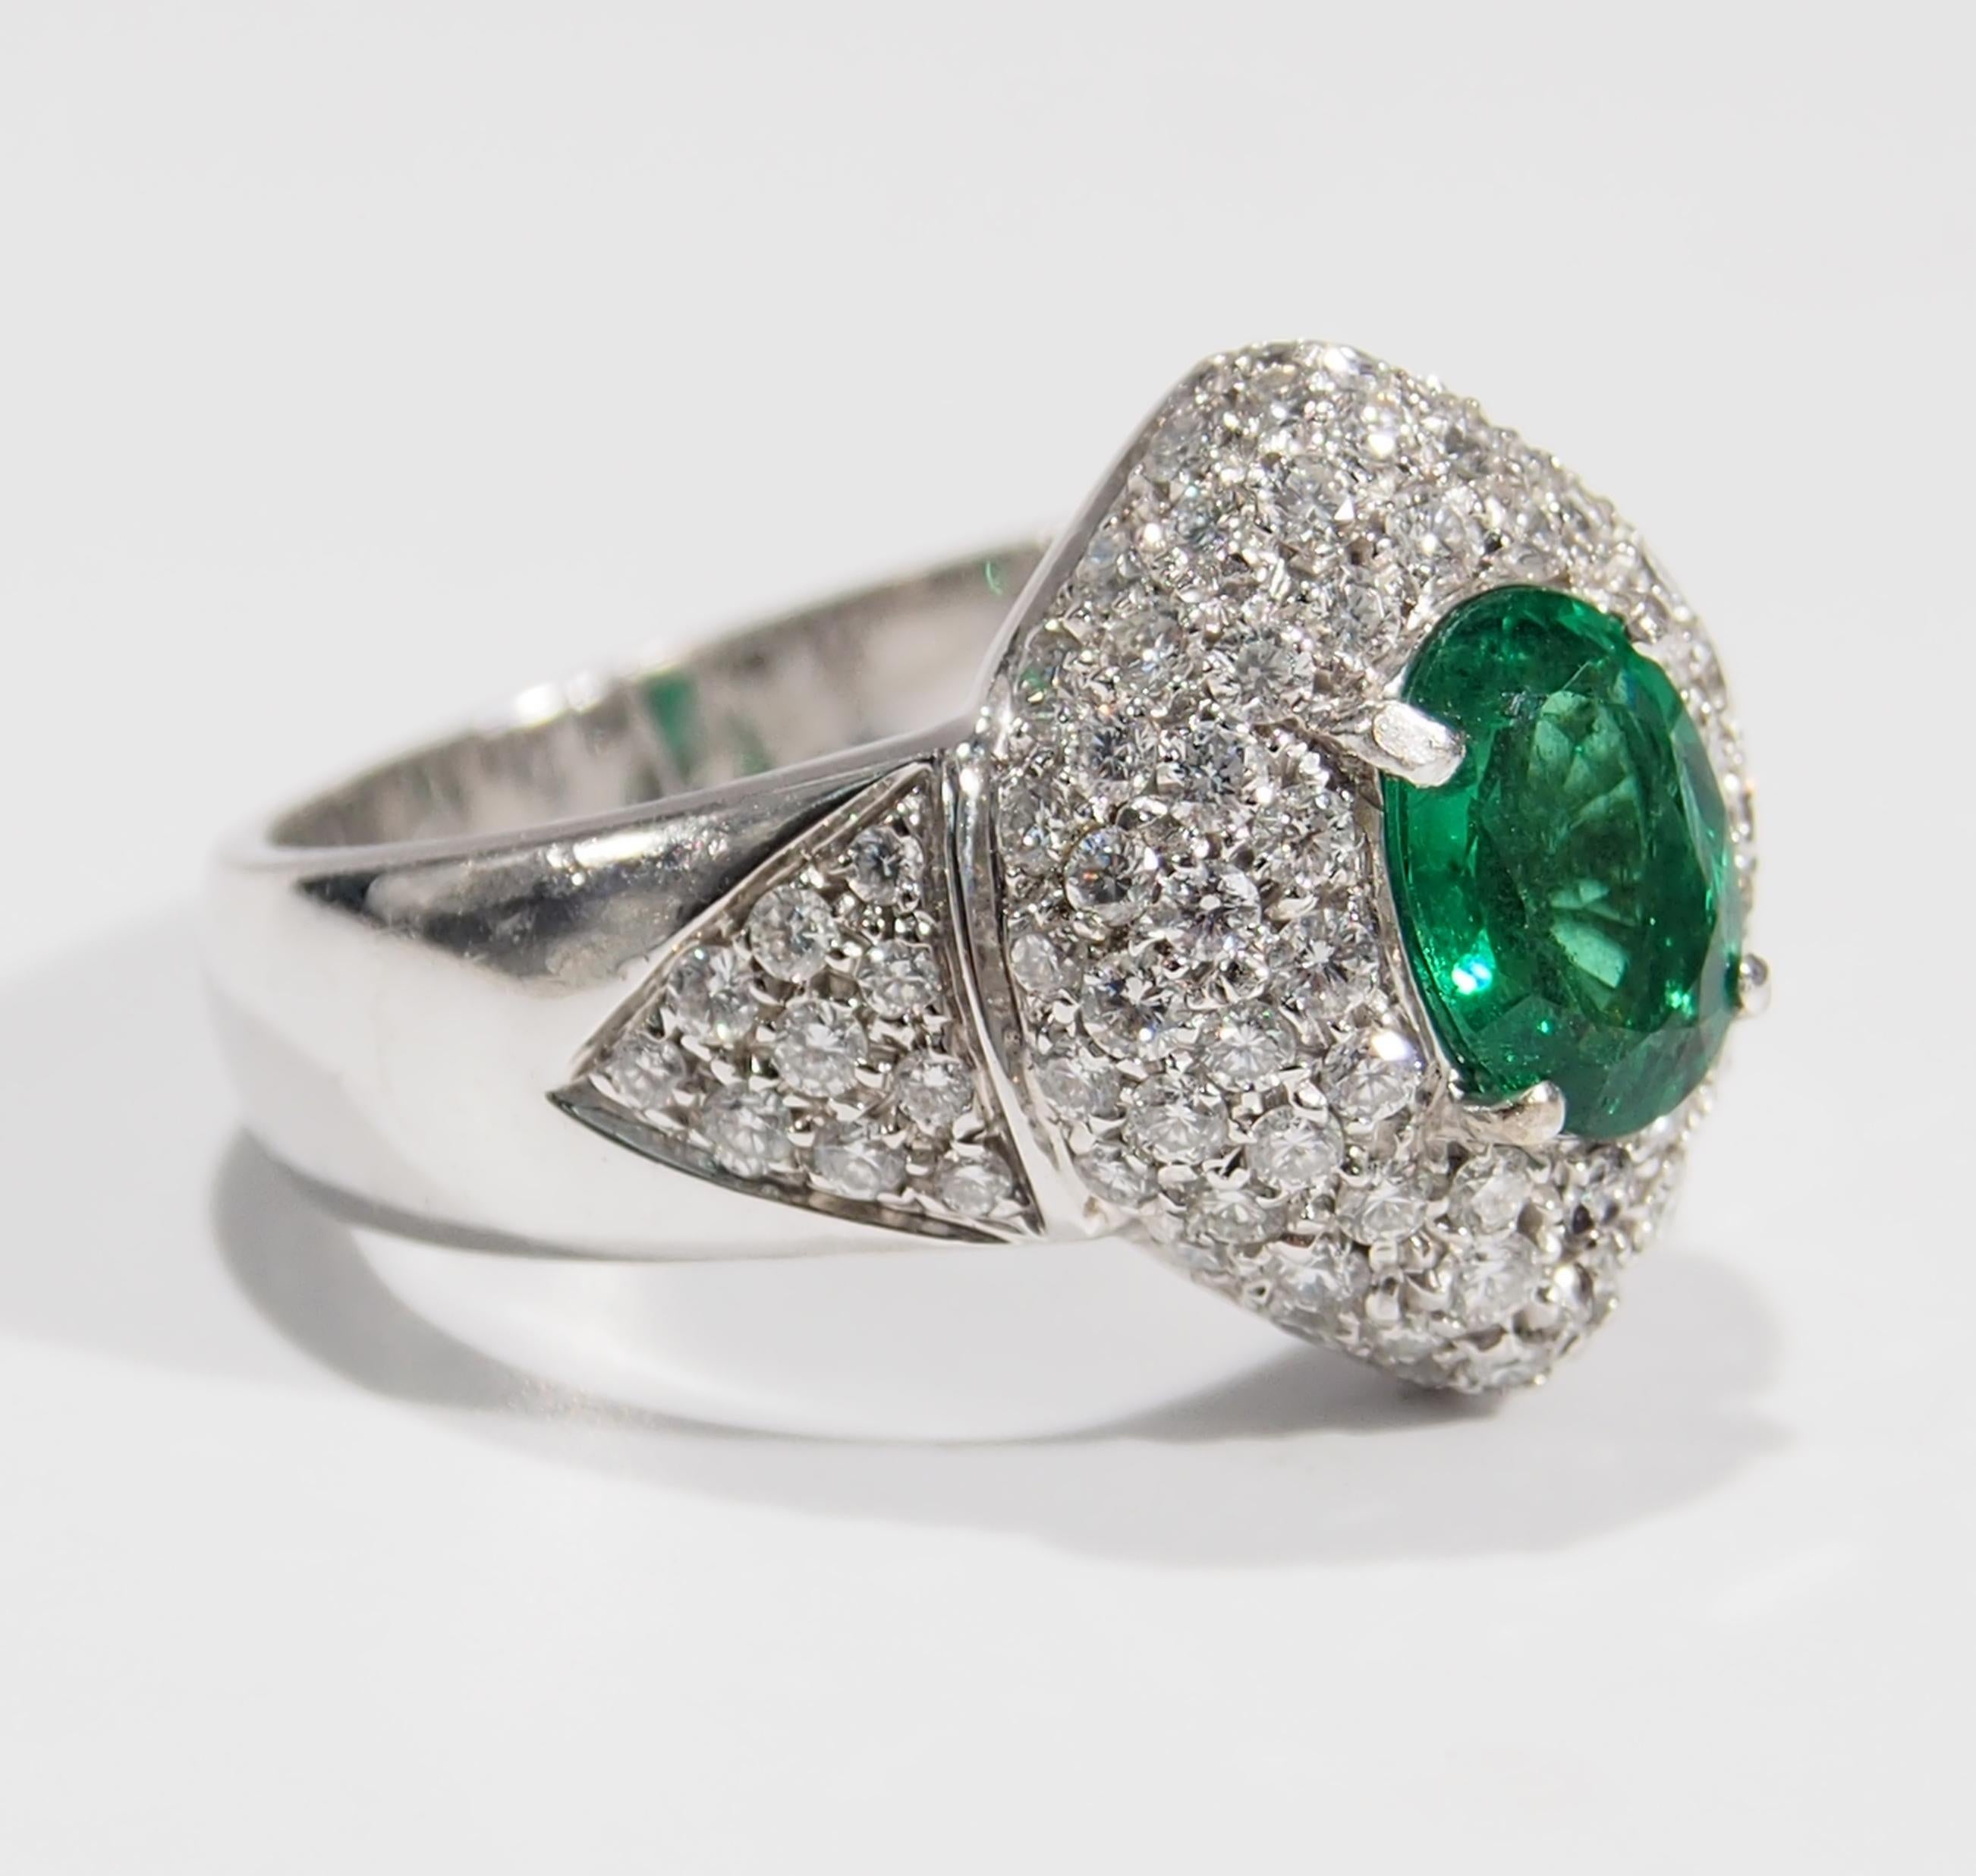 This is a sparkling 18K White Gold Diamond and Emerald Cluster Ring with approximately (94) Round Brilliant Cut Diamonds, 1.18ctw, G-H in Color, VS in Clarity that surround an exquisite Oval Emerald, 1.00ct. A stunning Ring to wear for any occasion